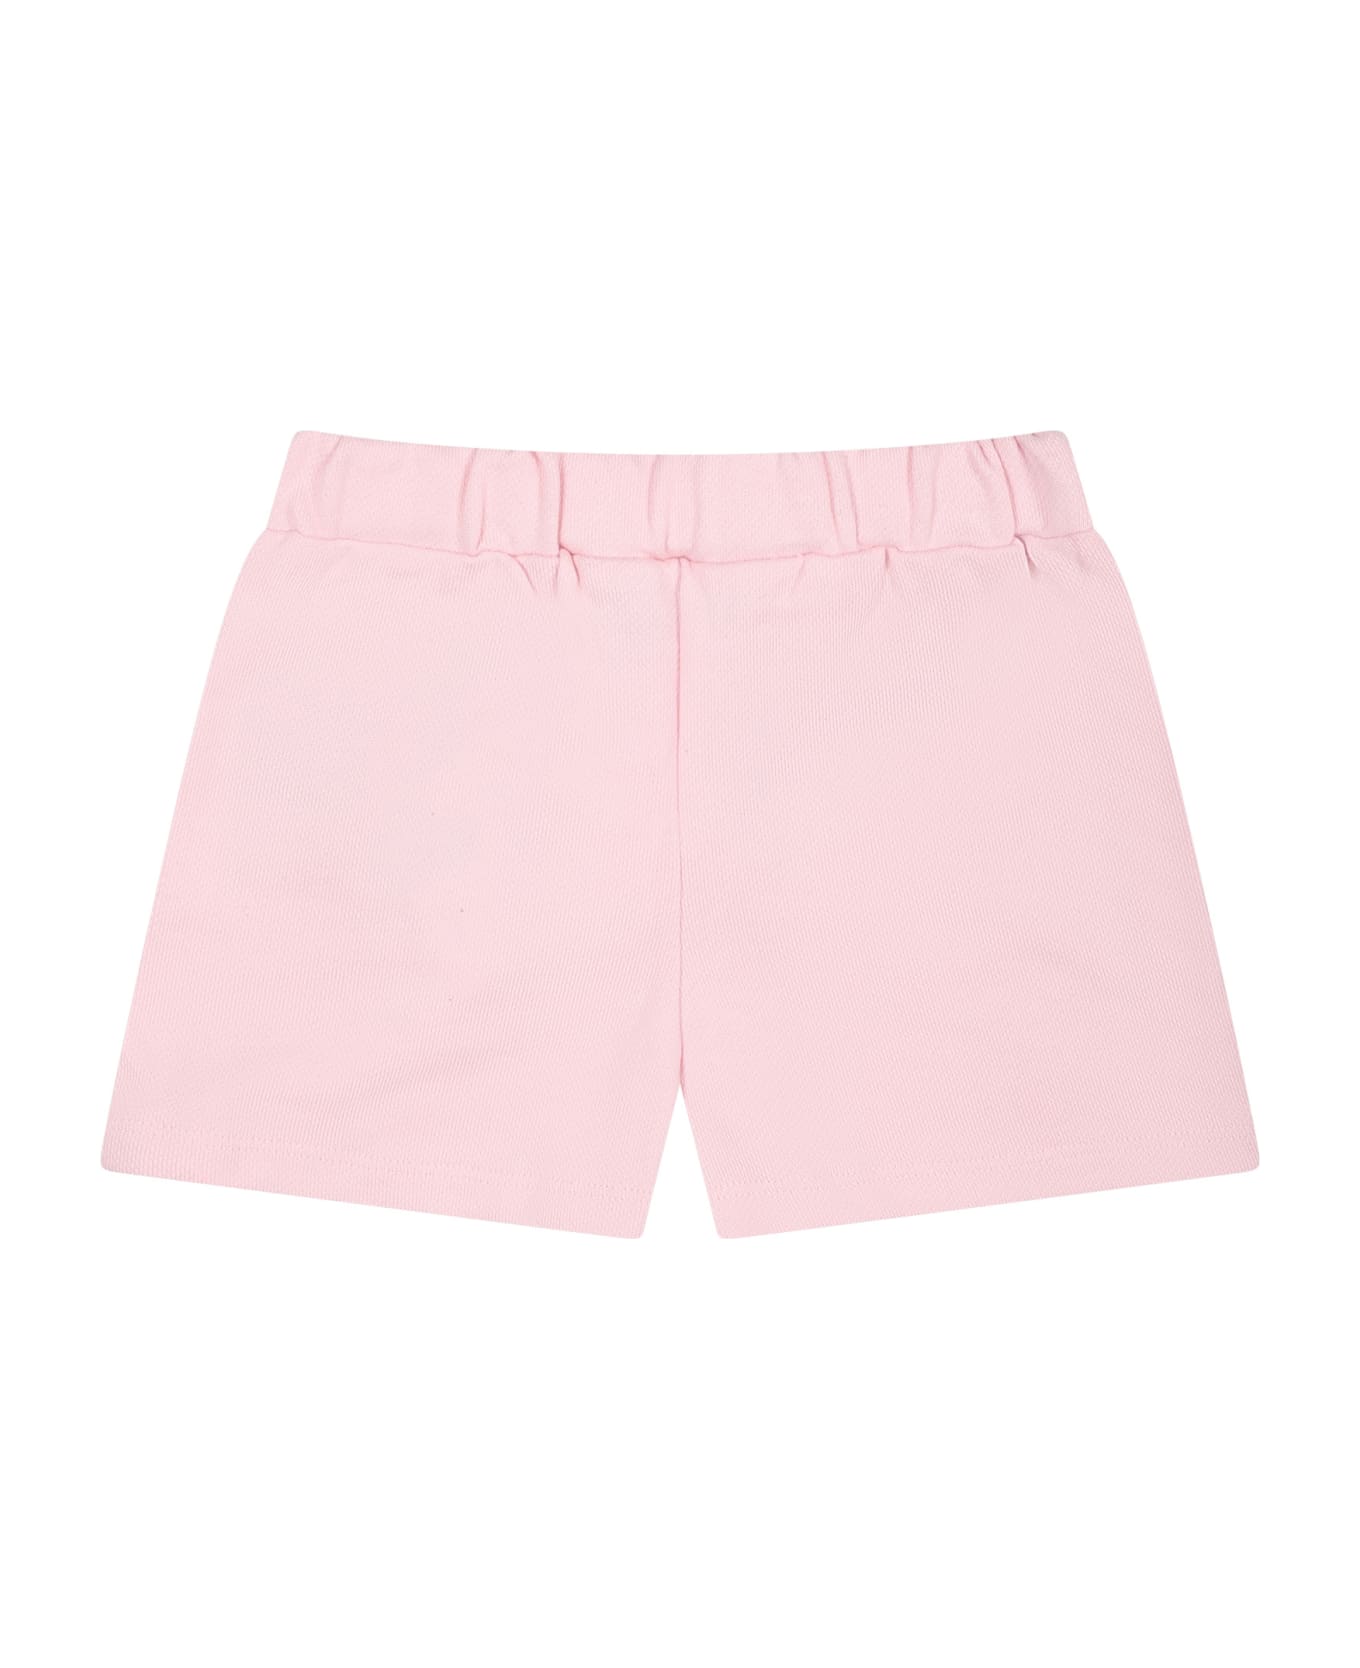 Balmain Pink Shorts For Baby Girl With Silver Buttons - Pink